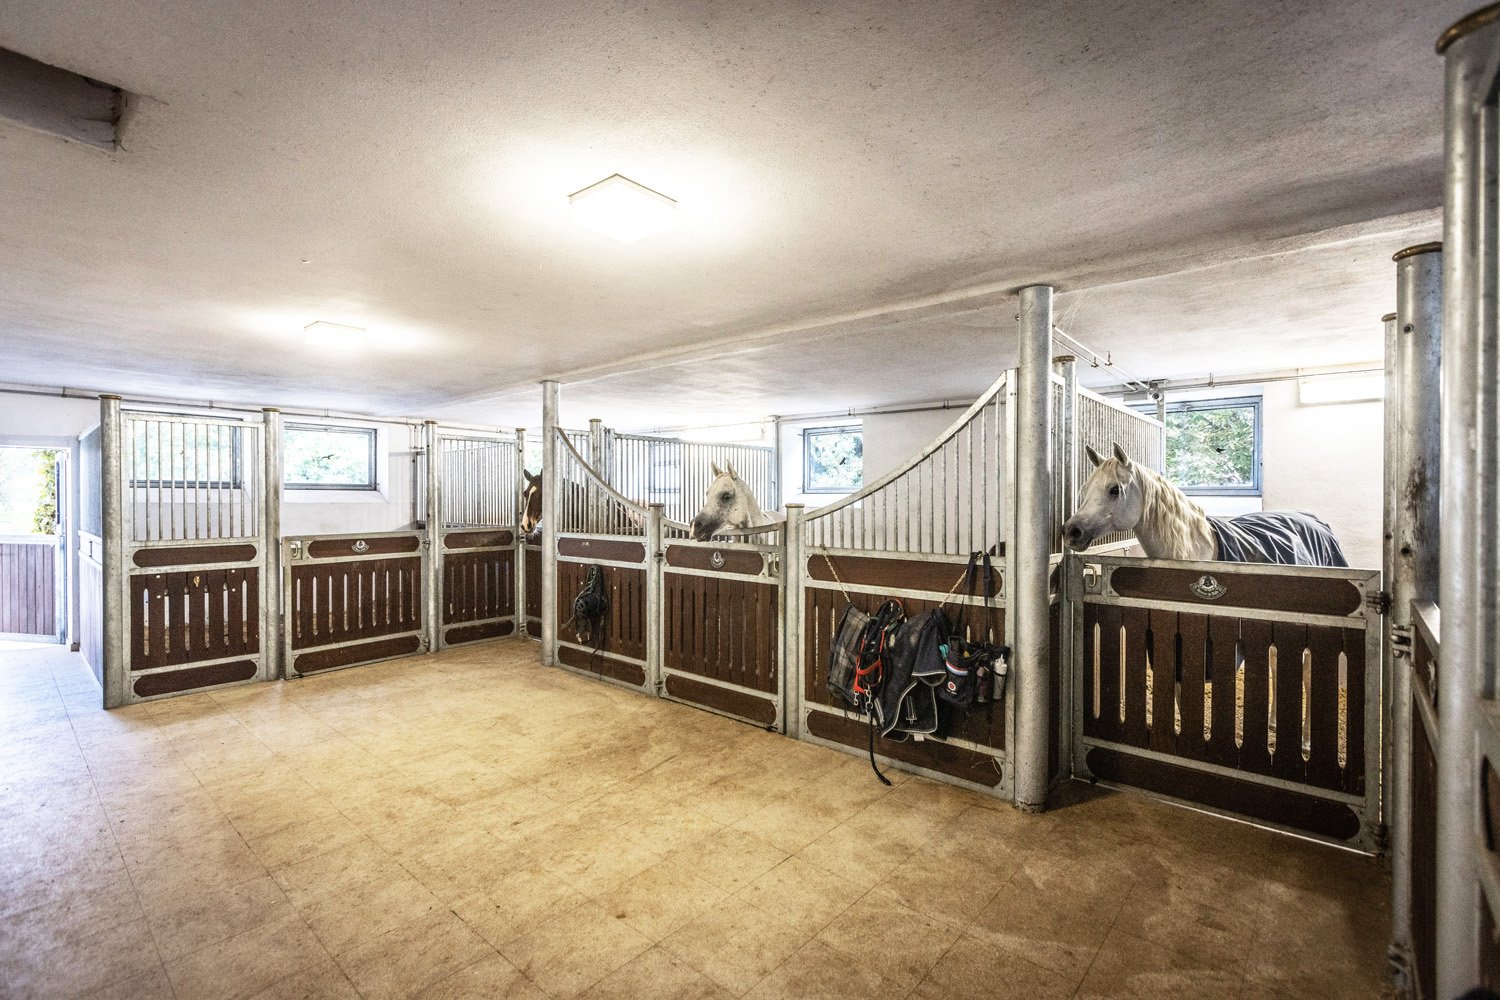 2422 germany, bavaria, luxury countryhouse with stables for sale